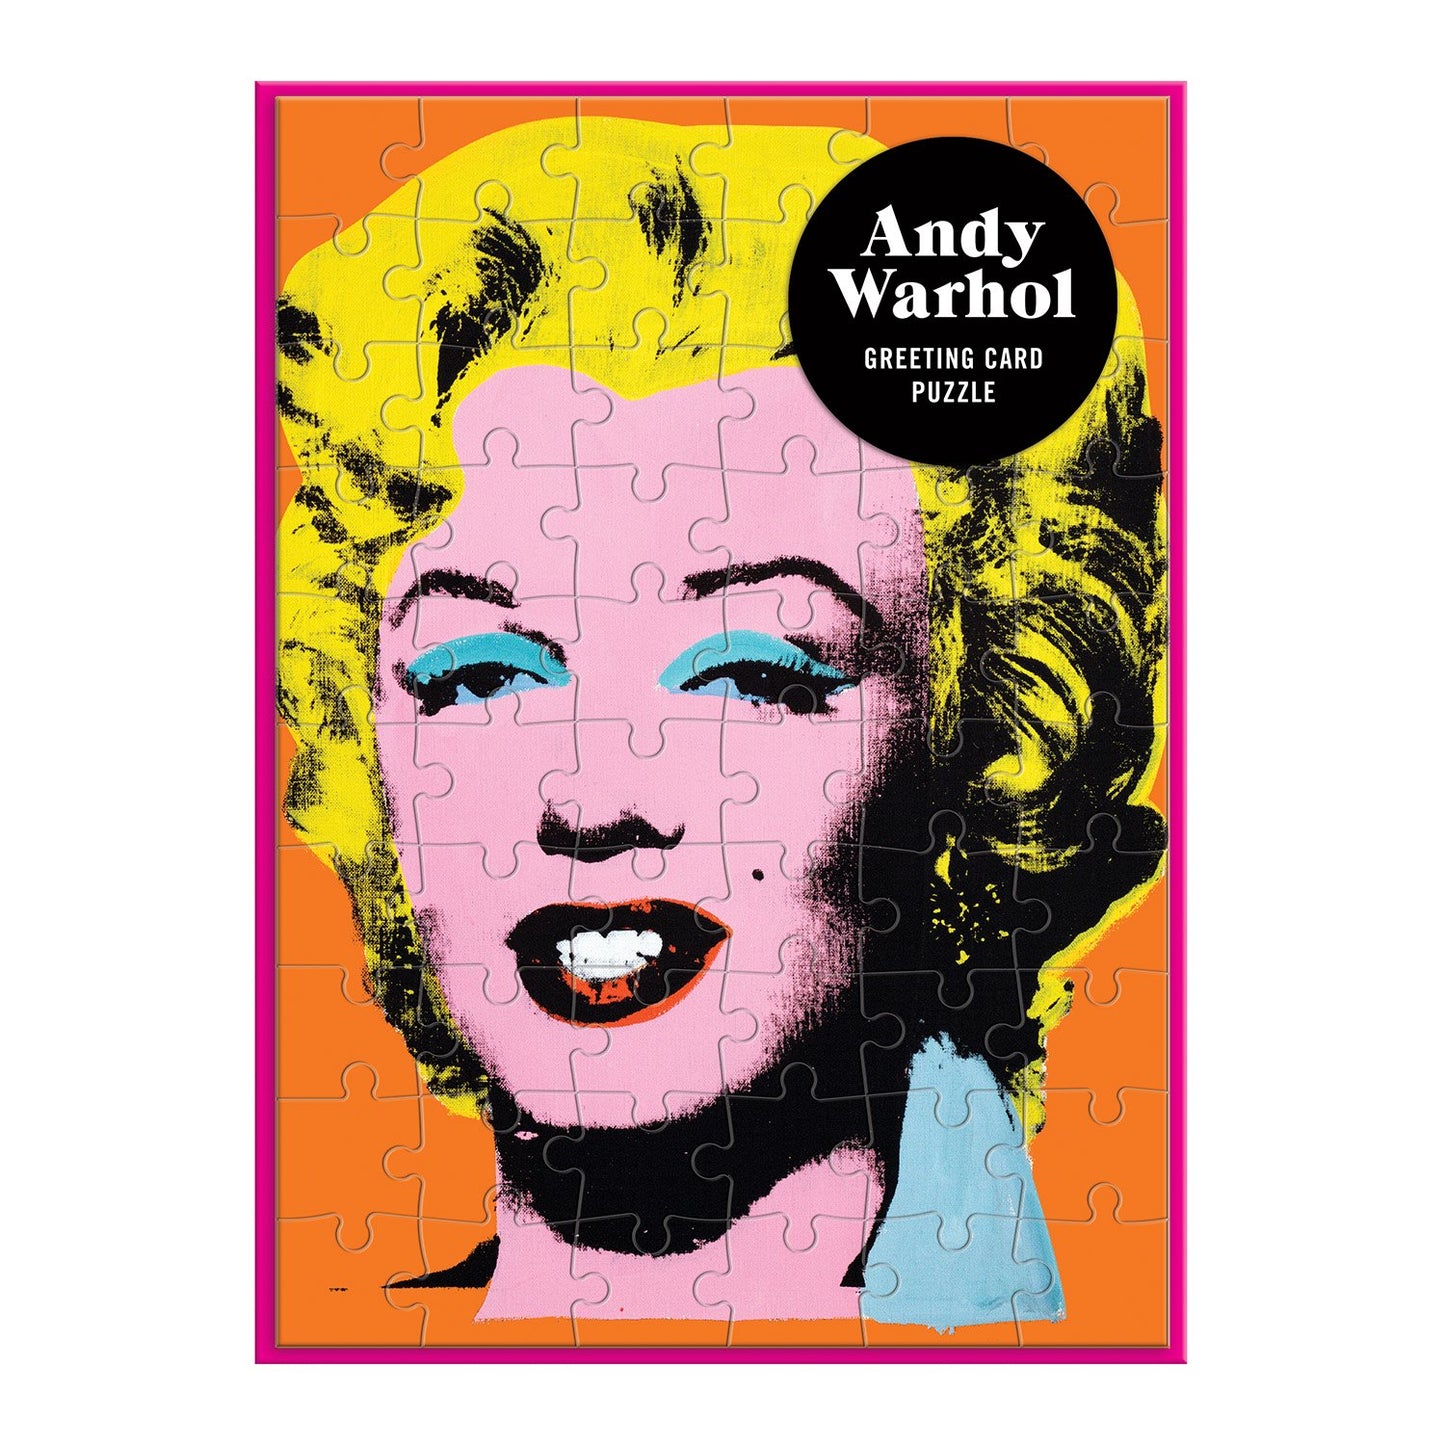 andy-warhol-marilyn-greeting-card-puzzle-greeting-card-puzzles-andy-warhol-collection-171635_2400x